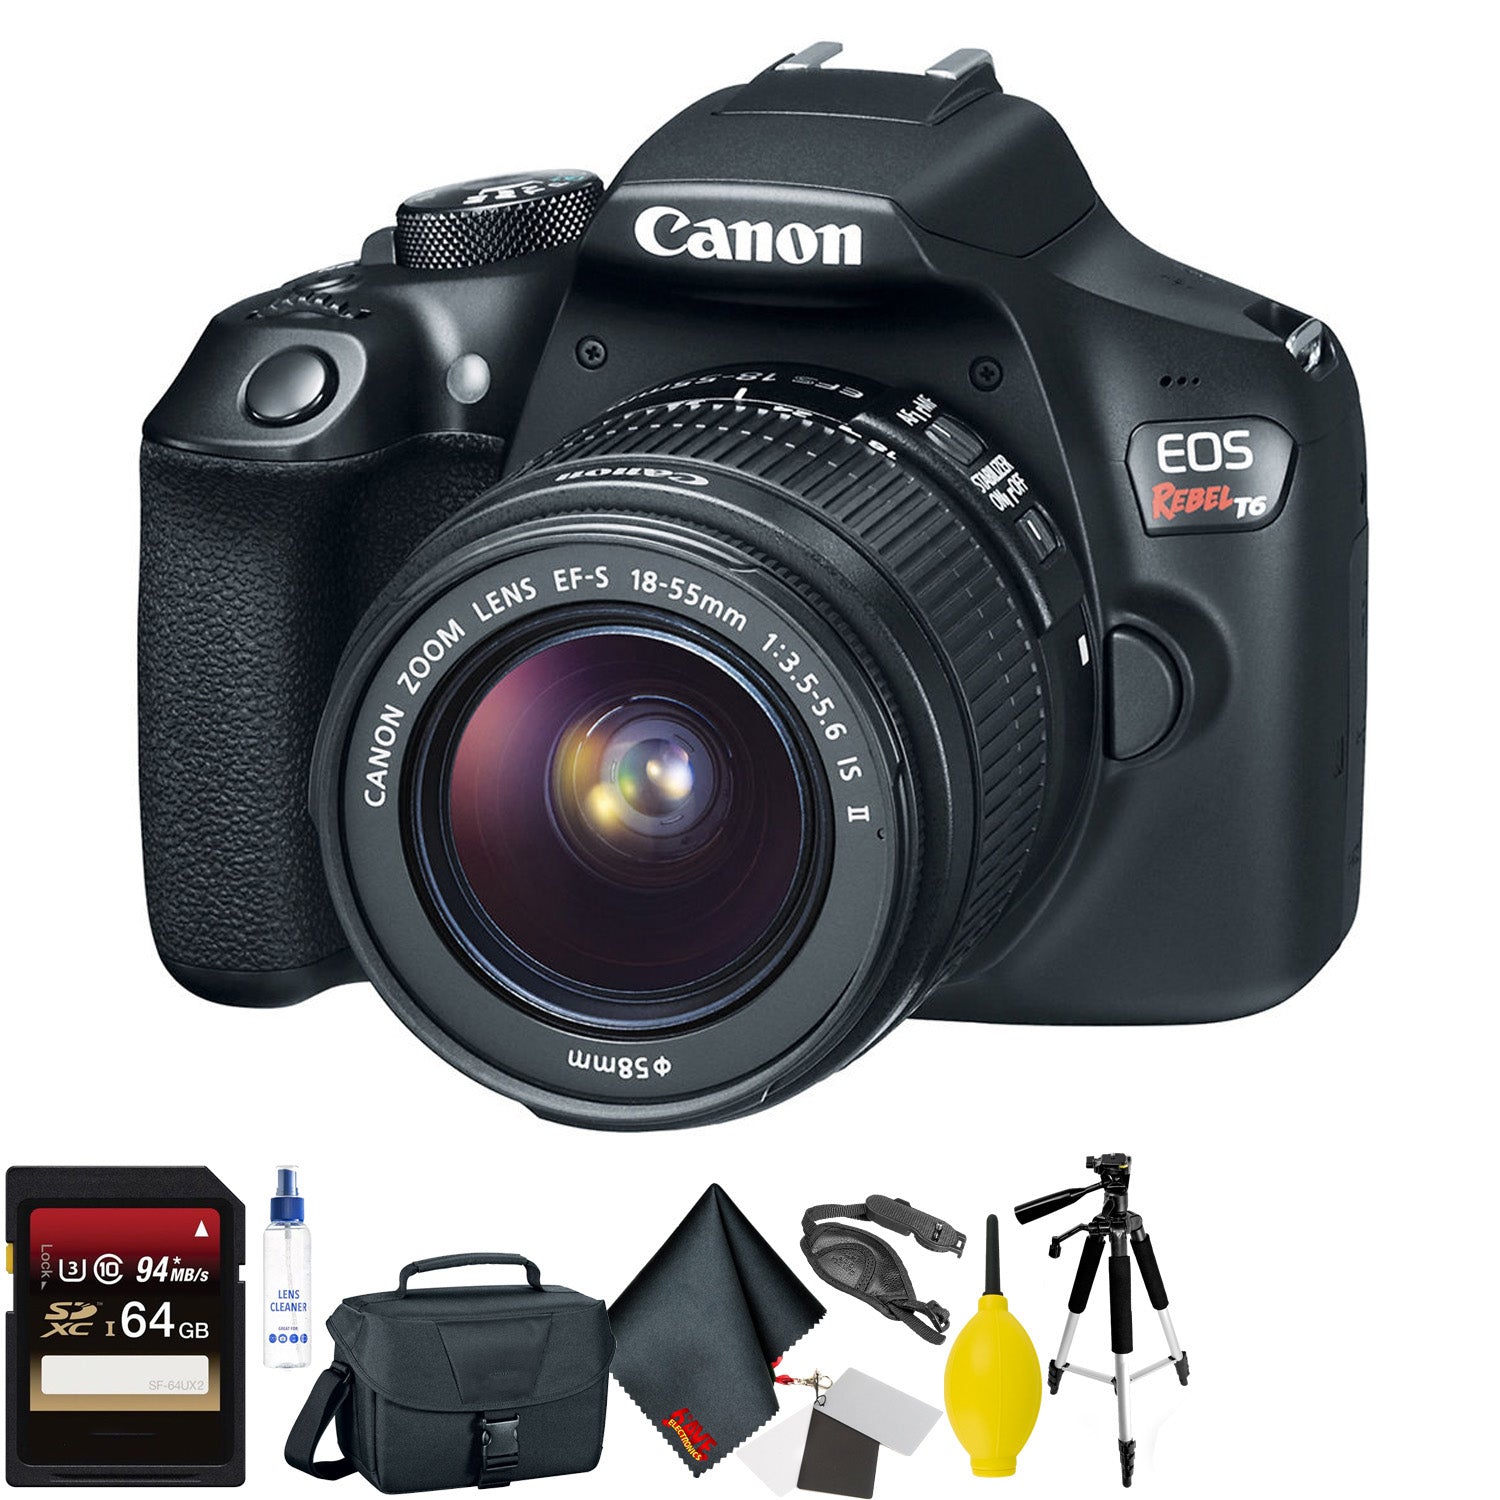 Canon EOS Rebel T6 DSLR Camera with 18-55mm Lens + 64GB Memory Card + Mega Accessory Kit + 1 Year Warranty Bundle